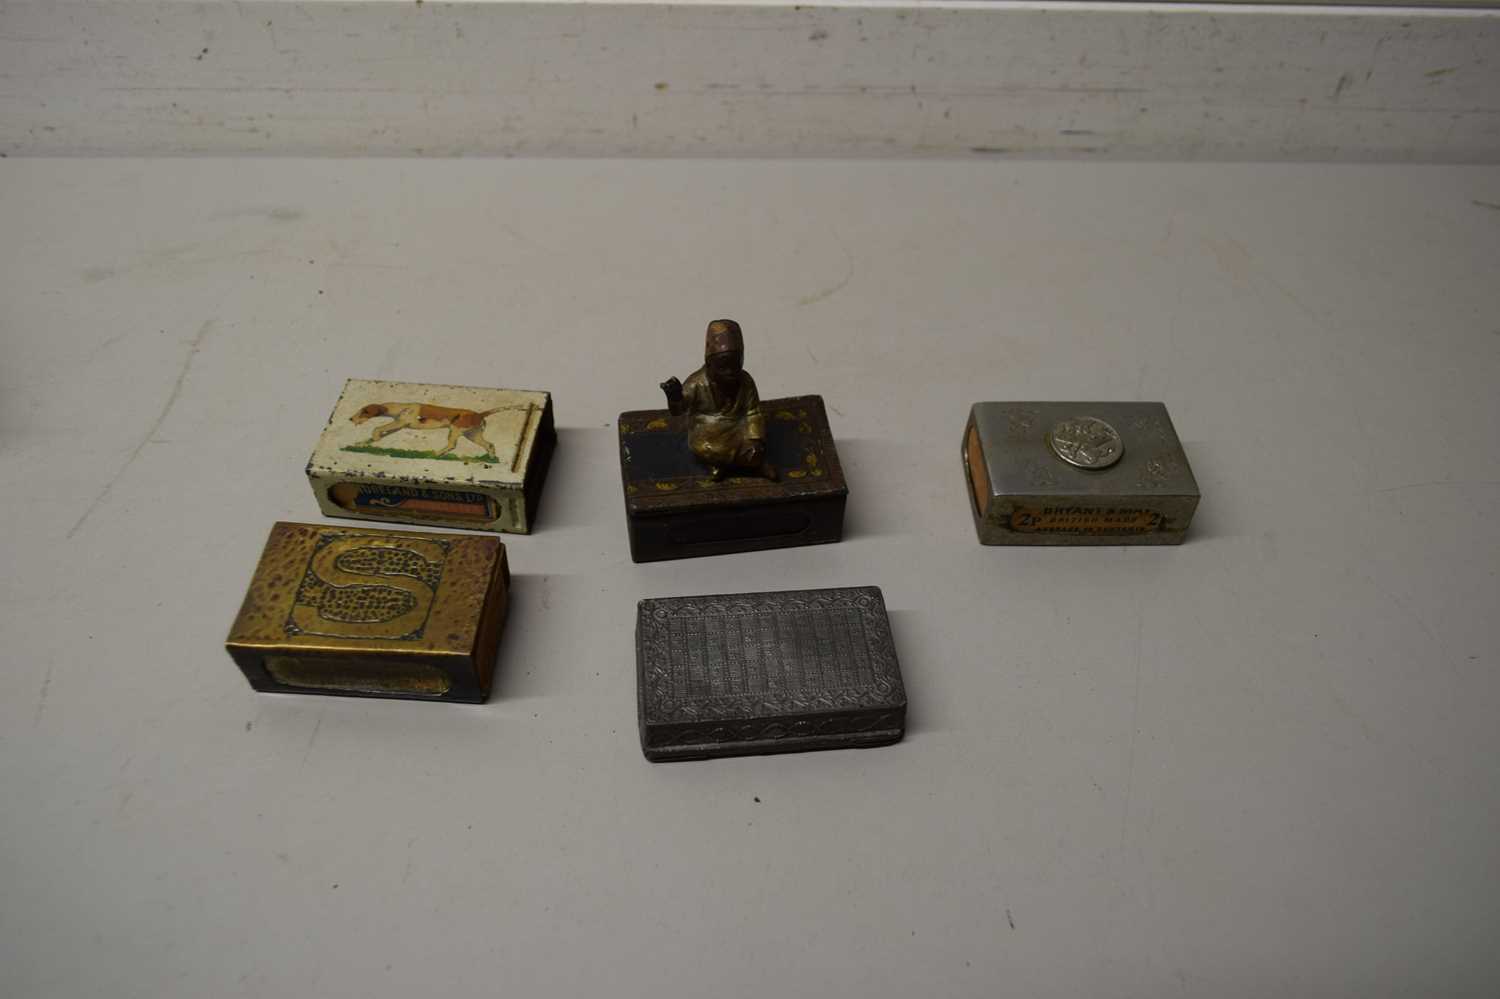 COLLECTION OF VARIOUS BASE METAL MATCHBOX COVERS TO INCLUDE ONE MOUNTED WITH A SEATED FIGURE OF A